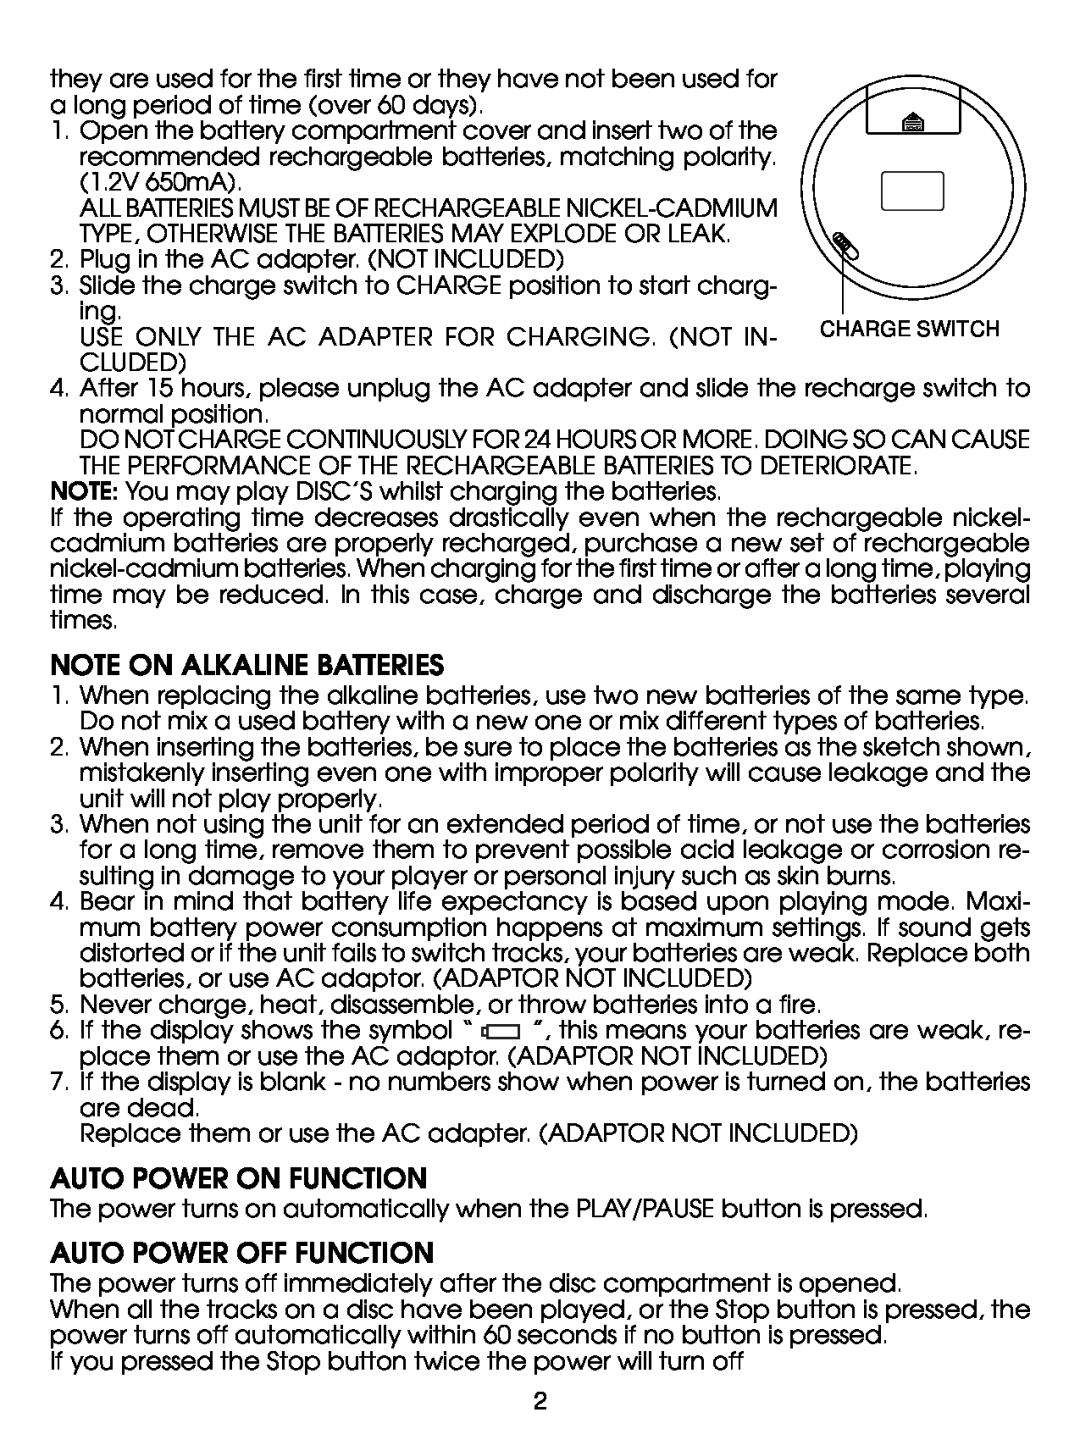 Jwin JX-CD280 instruction manual Note On Alkaline Batteries, Auto Power On Function, Auto Power Off Function 